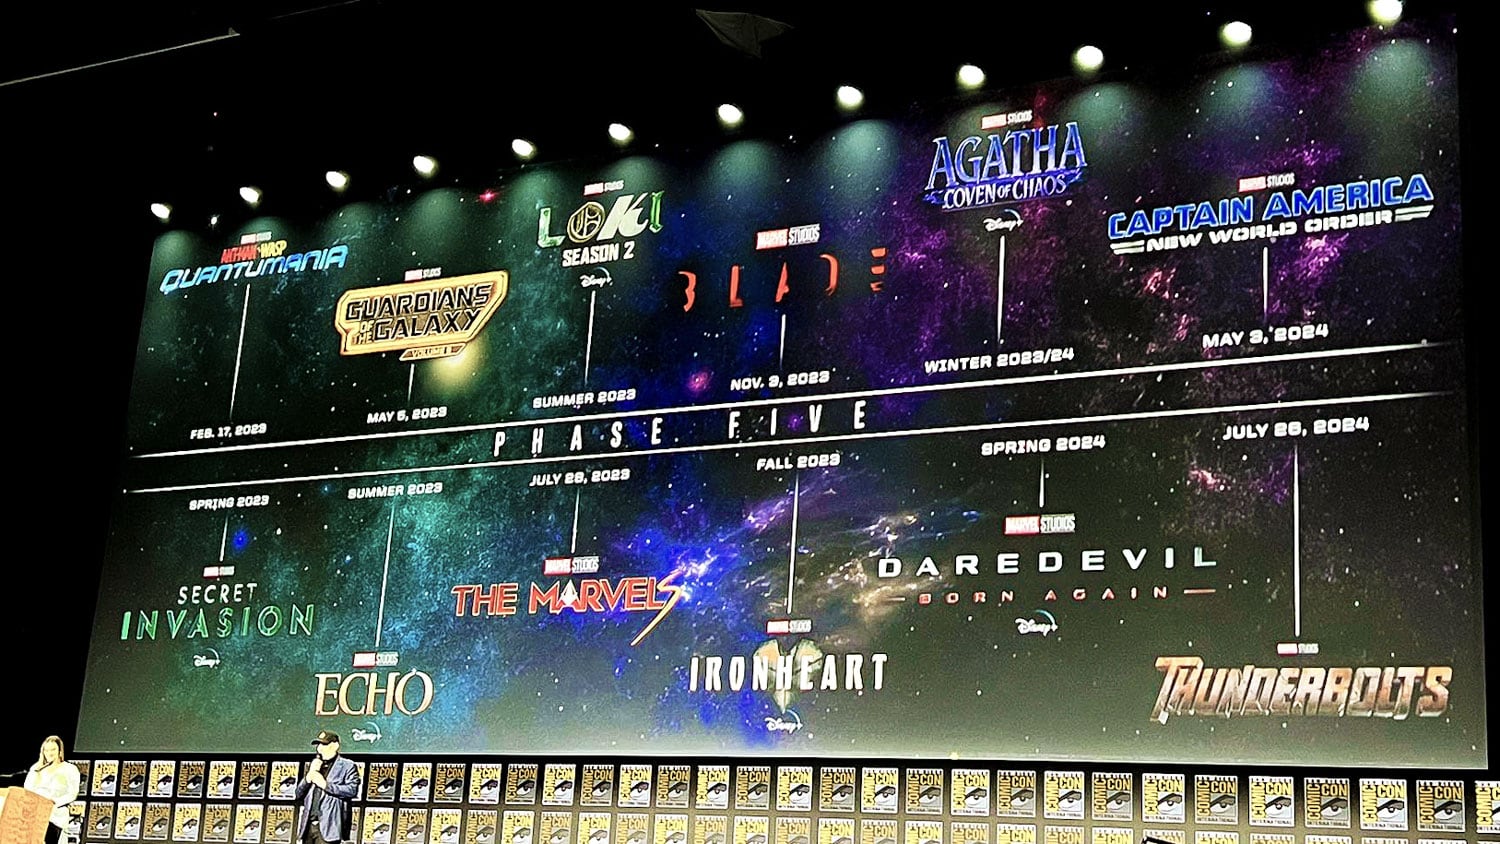 Here's-The-The-Full-Slate-Of-Movies-&-Series-Marvel-Announced-At-Comic-Con